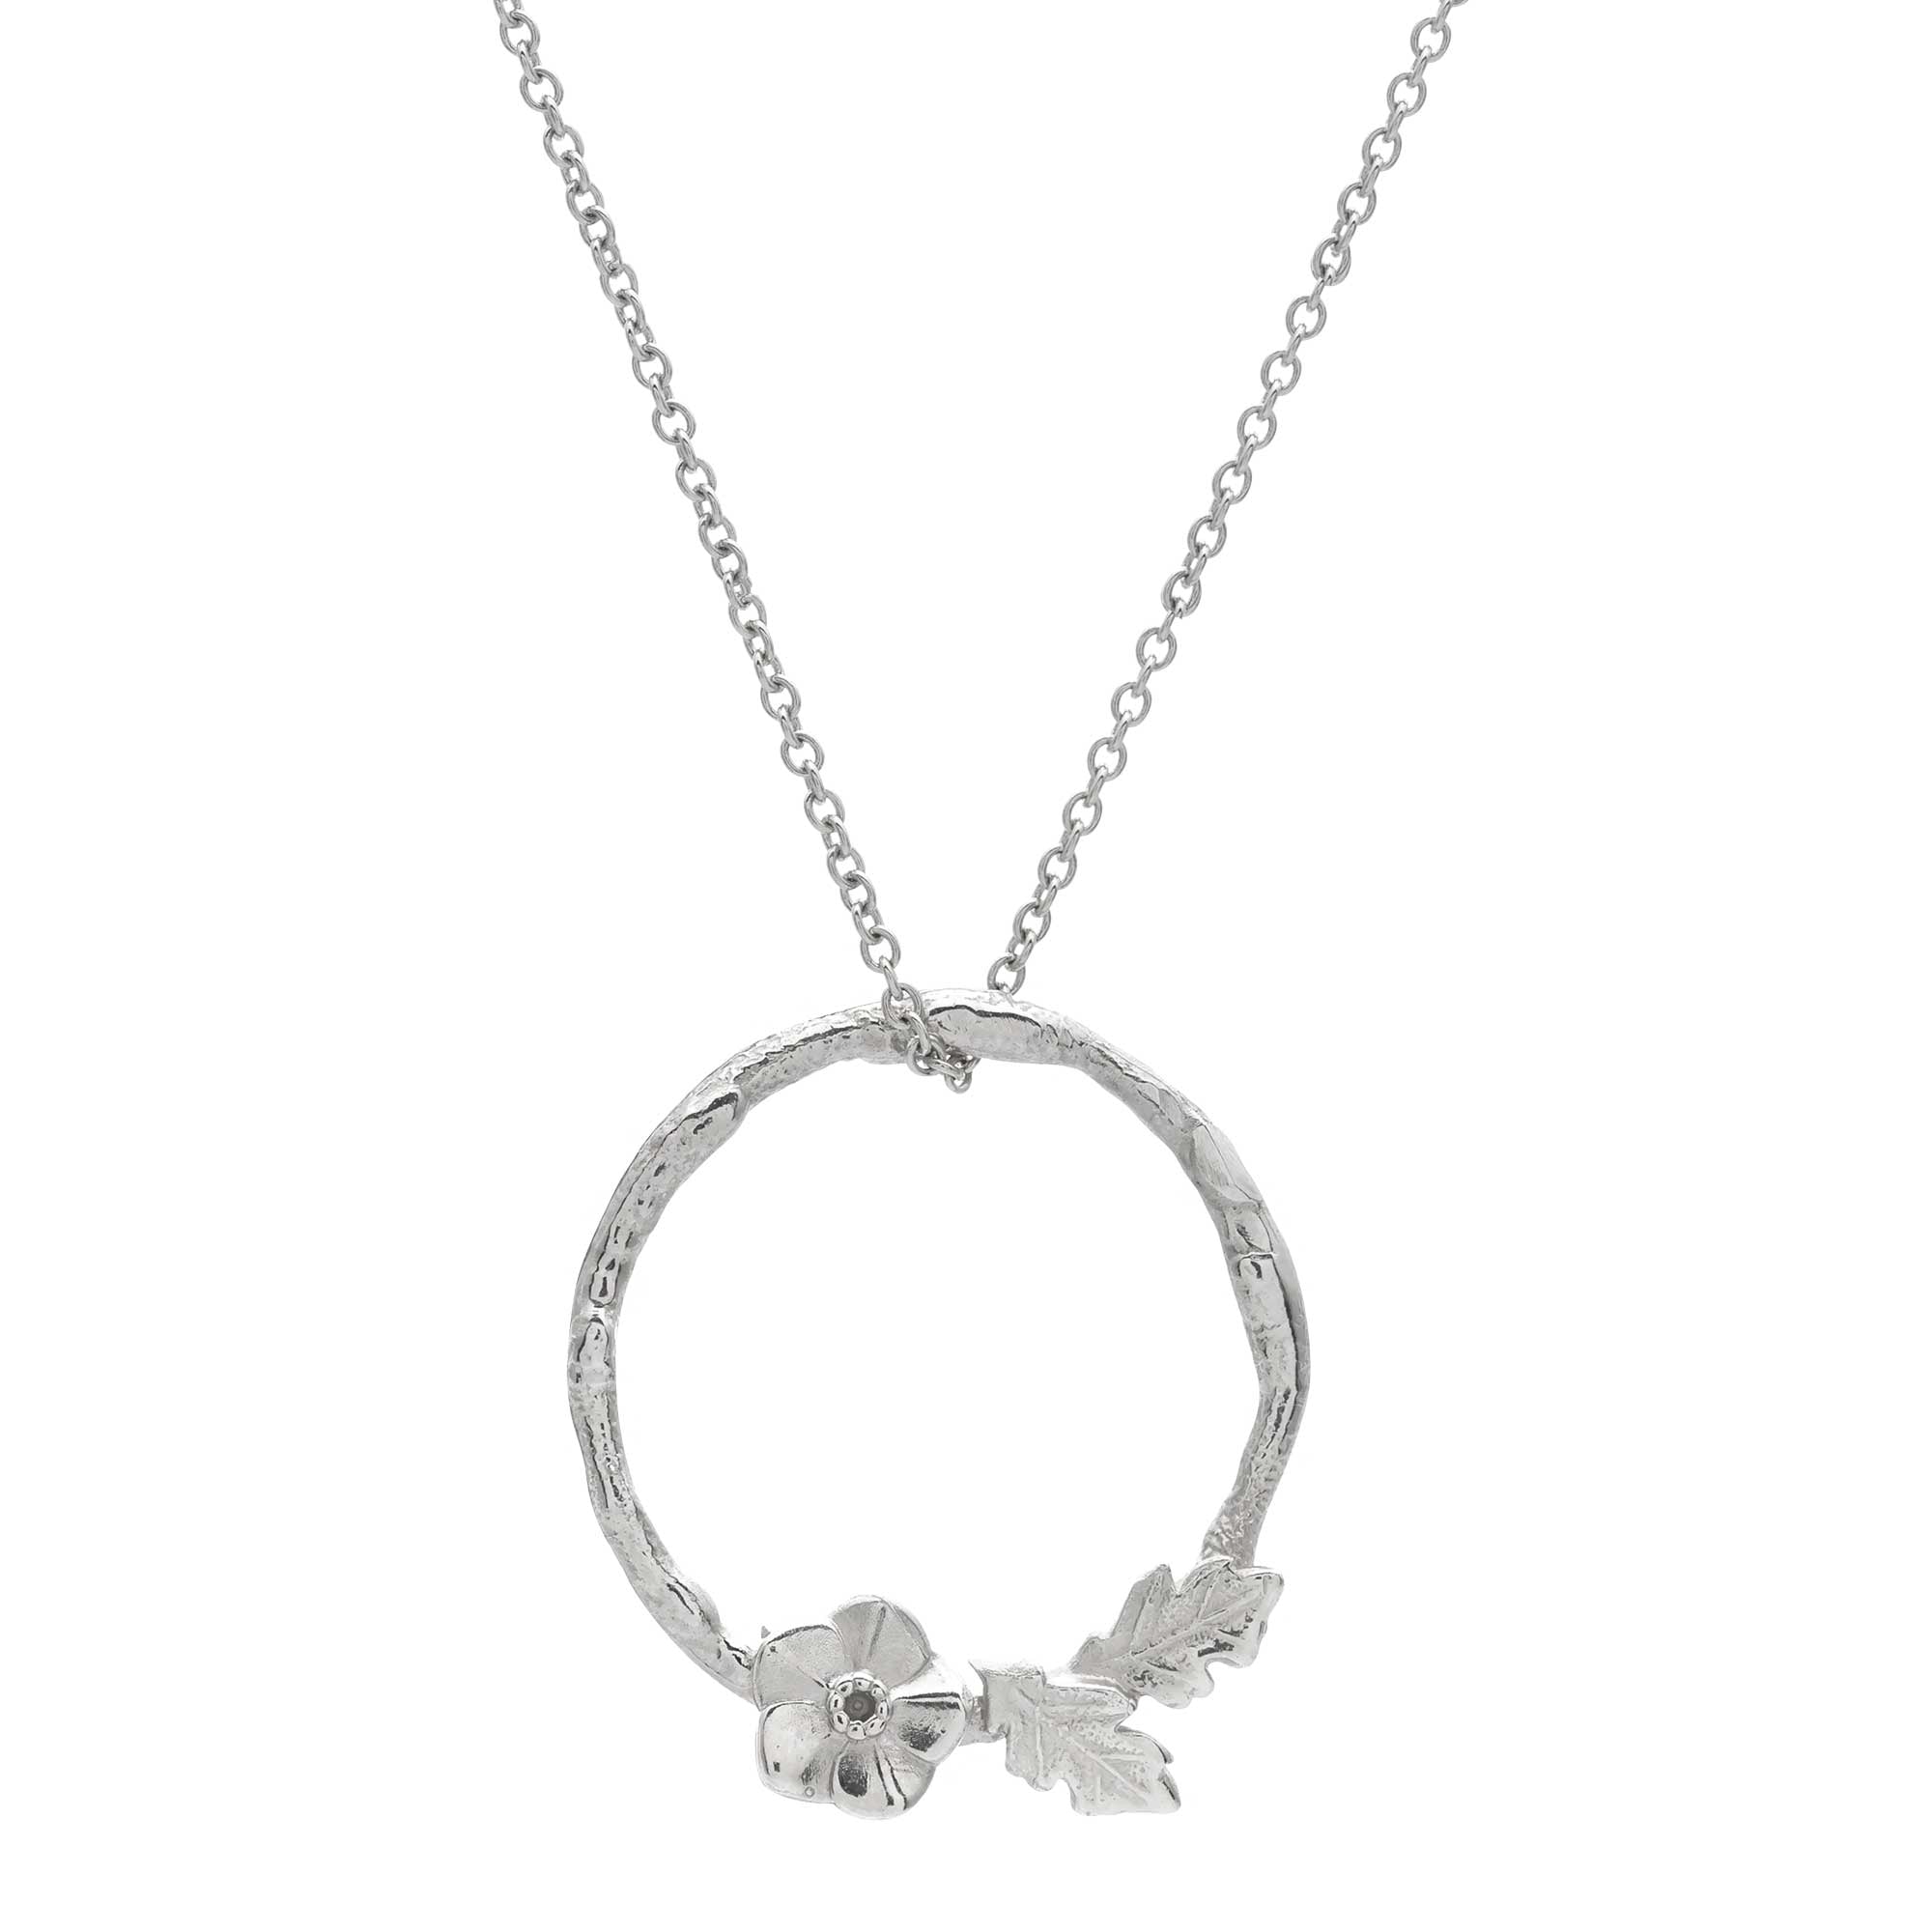 Forget me not wreath silver necklace flower pendant RHS Chelsea Flower Show